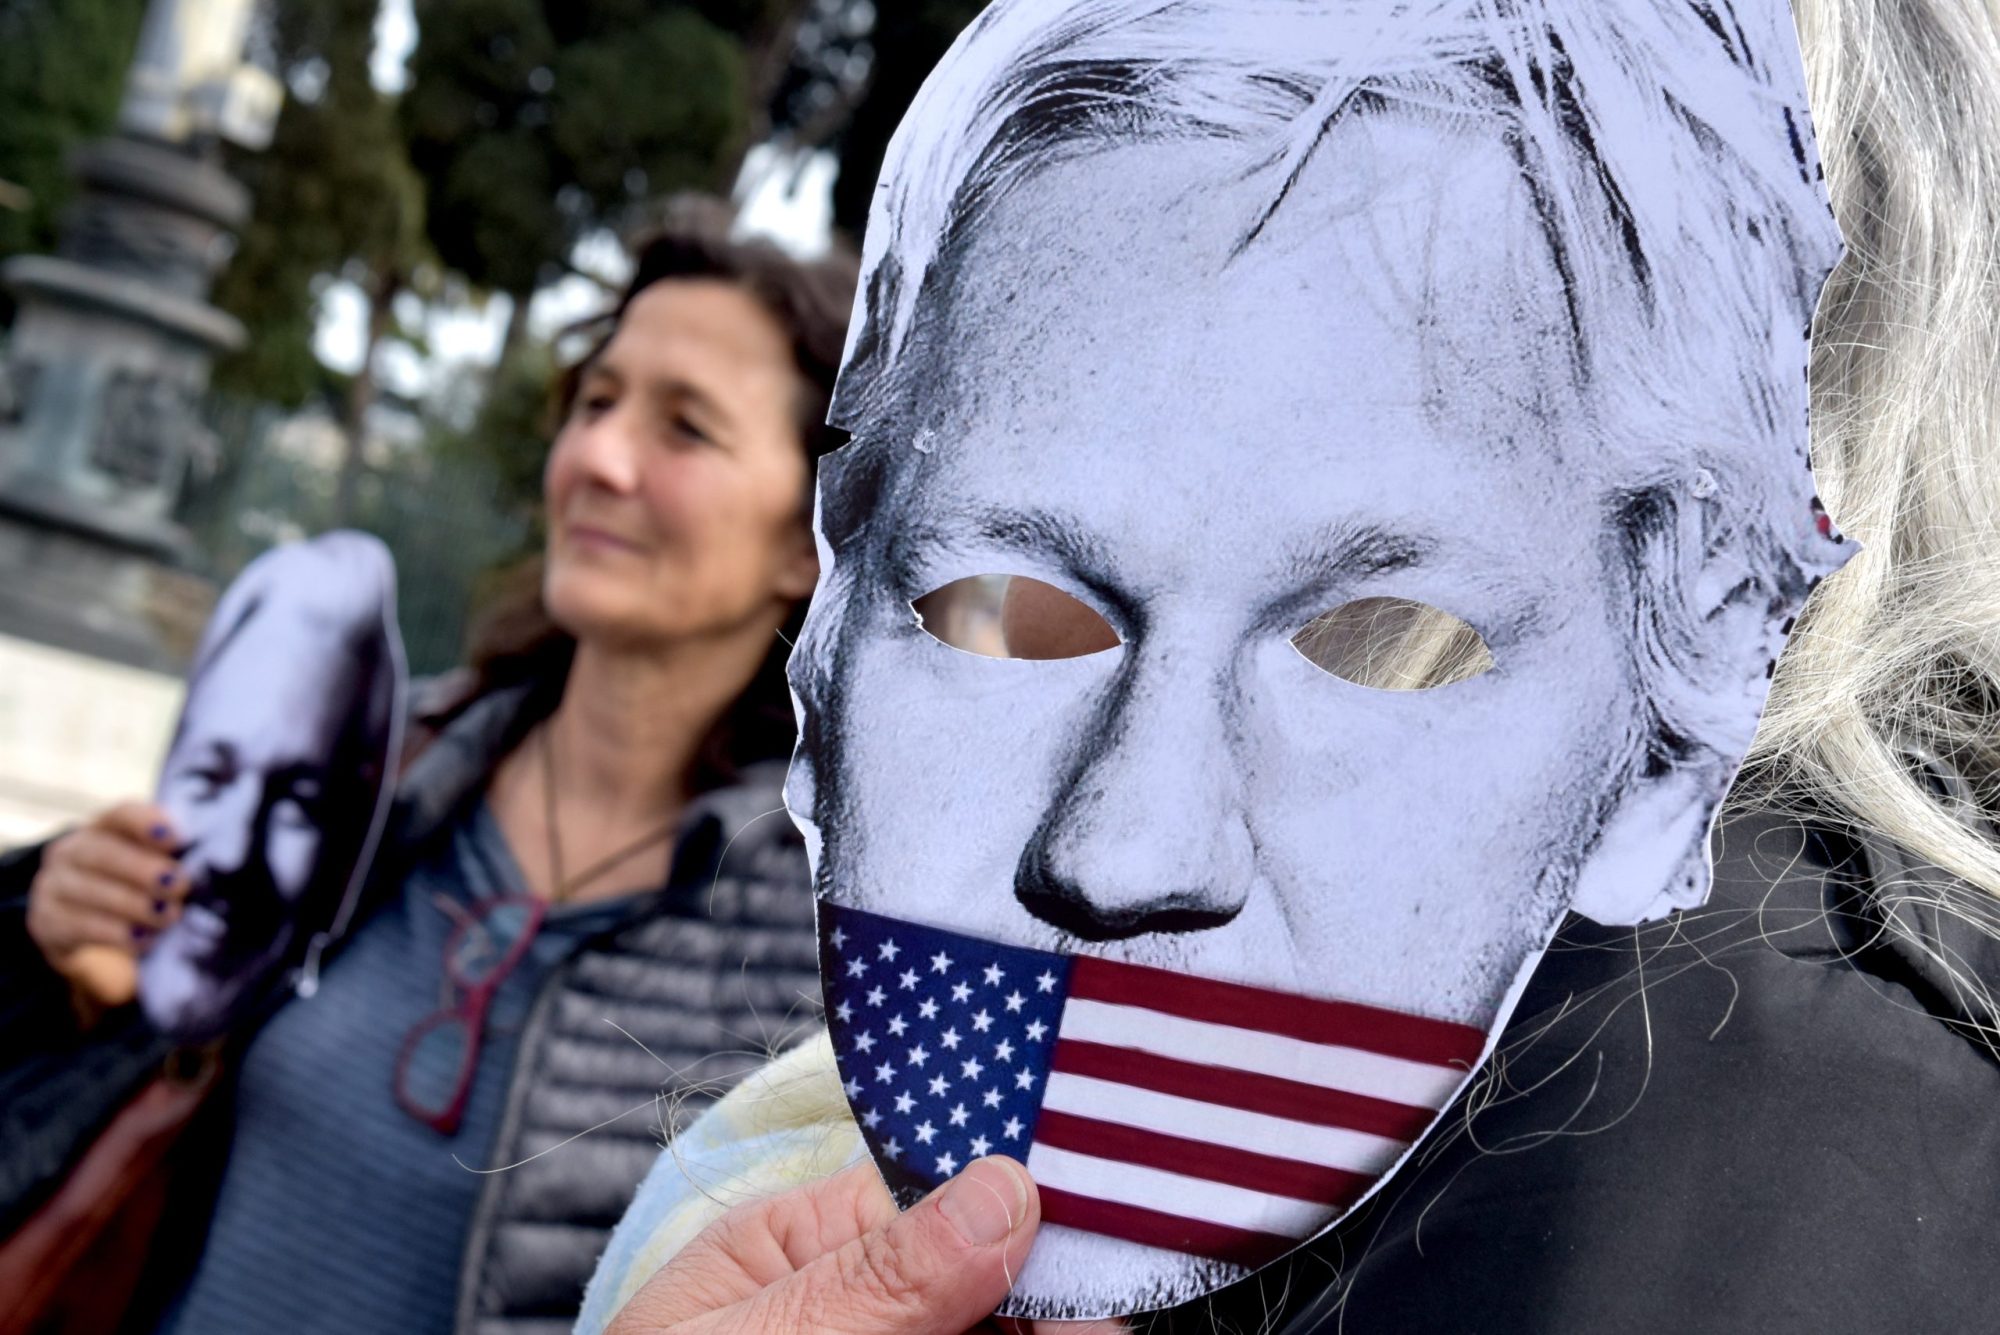 People protest in Piazza della Repubblica to demand the freedom of Julian Assange, with banners, placards and silhouettes depicting the journalists in prison, on April 11, 2023 in Rome, Italy. Photo by Simona Granati - Corbis/Corbis via Getty Images